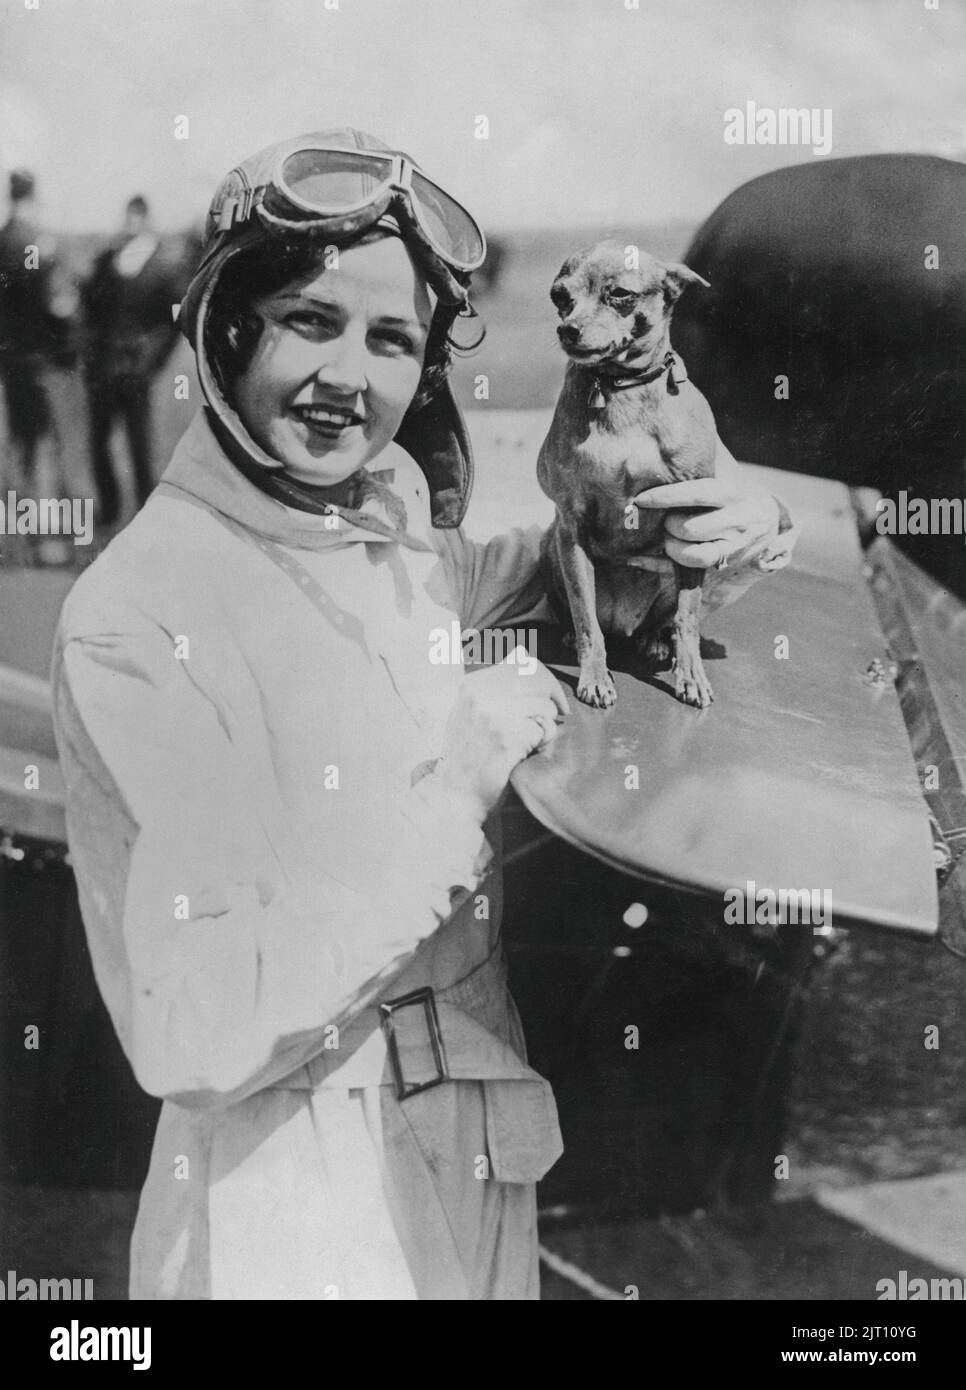 Rosalie Gordon. American pilot in Gates Flying Cirucs that in the 1920s became exceedingly popular and drew around 30 000 spectators to every show. She was one of the Gates Flying Circus main attractions as the first female skydiver. Pictured here beside her airplane with her dog. 1930s. Stock Photo